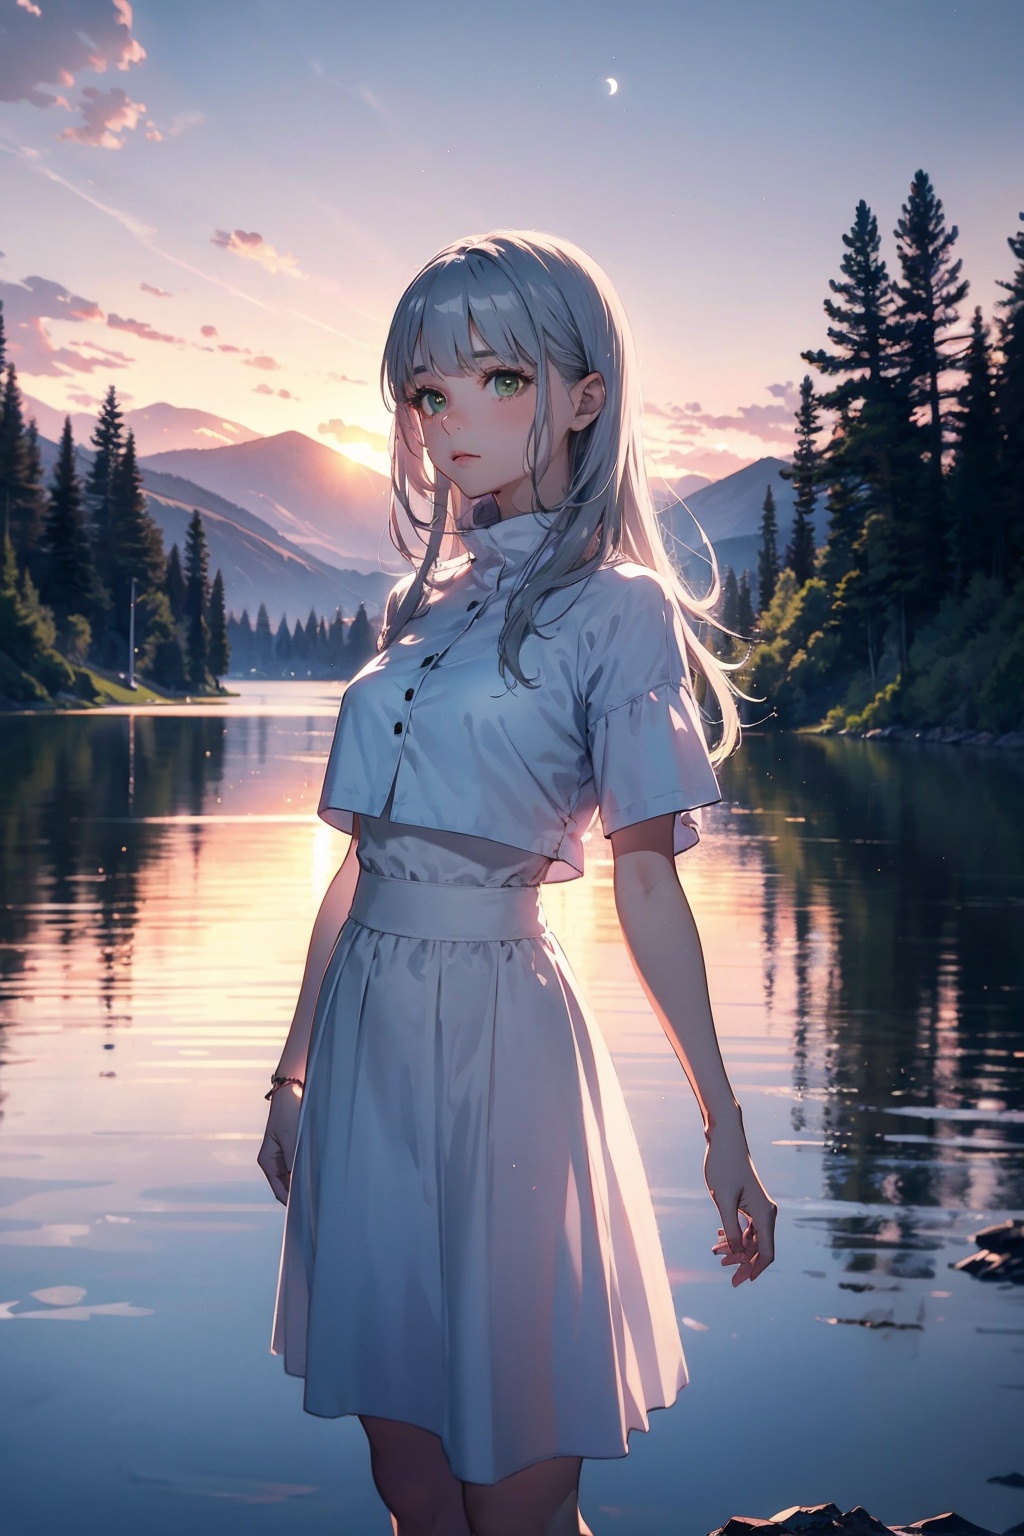 masterpiece, best quality, cinematic lighting, extremely detailed CG unity 8k wallpaper,.1girl, Silver long hair, flowing long hair, green eyes, pink clothes, white skirt, side gaze towards the camera, looking towards the camera, by the lake, in the wilderness, in the surrounding forests, full moon in the sky, moonlight reflected in the lake, lake reflections, distant mountains, birds, clouds.Evening, sunny, summer.Half-length photo,